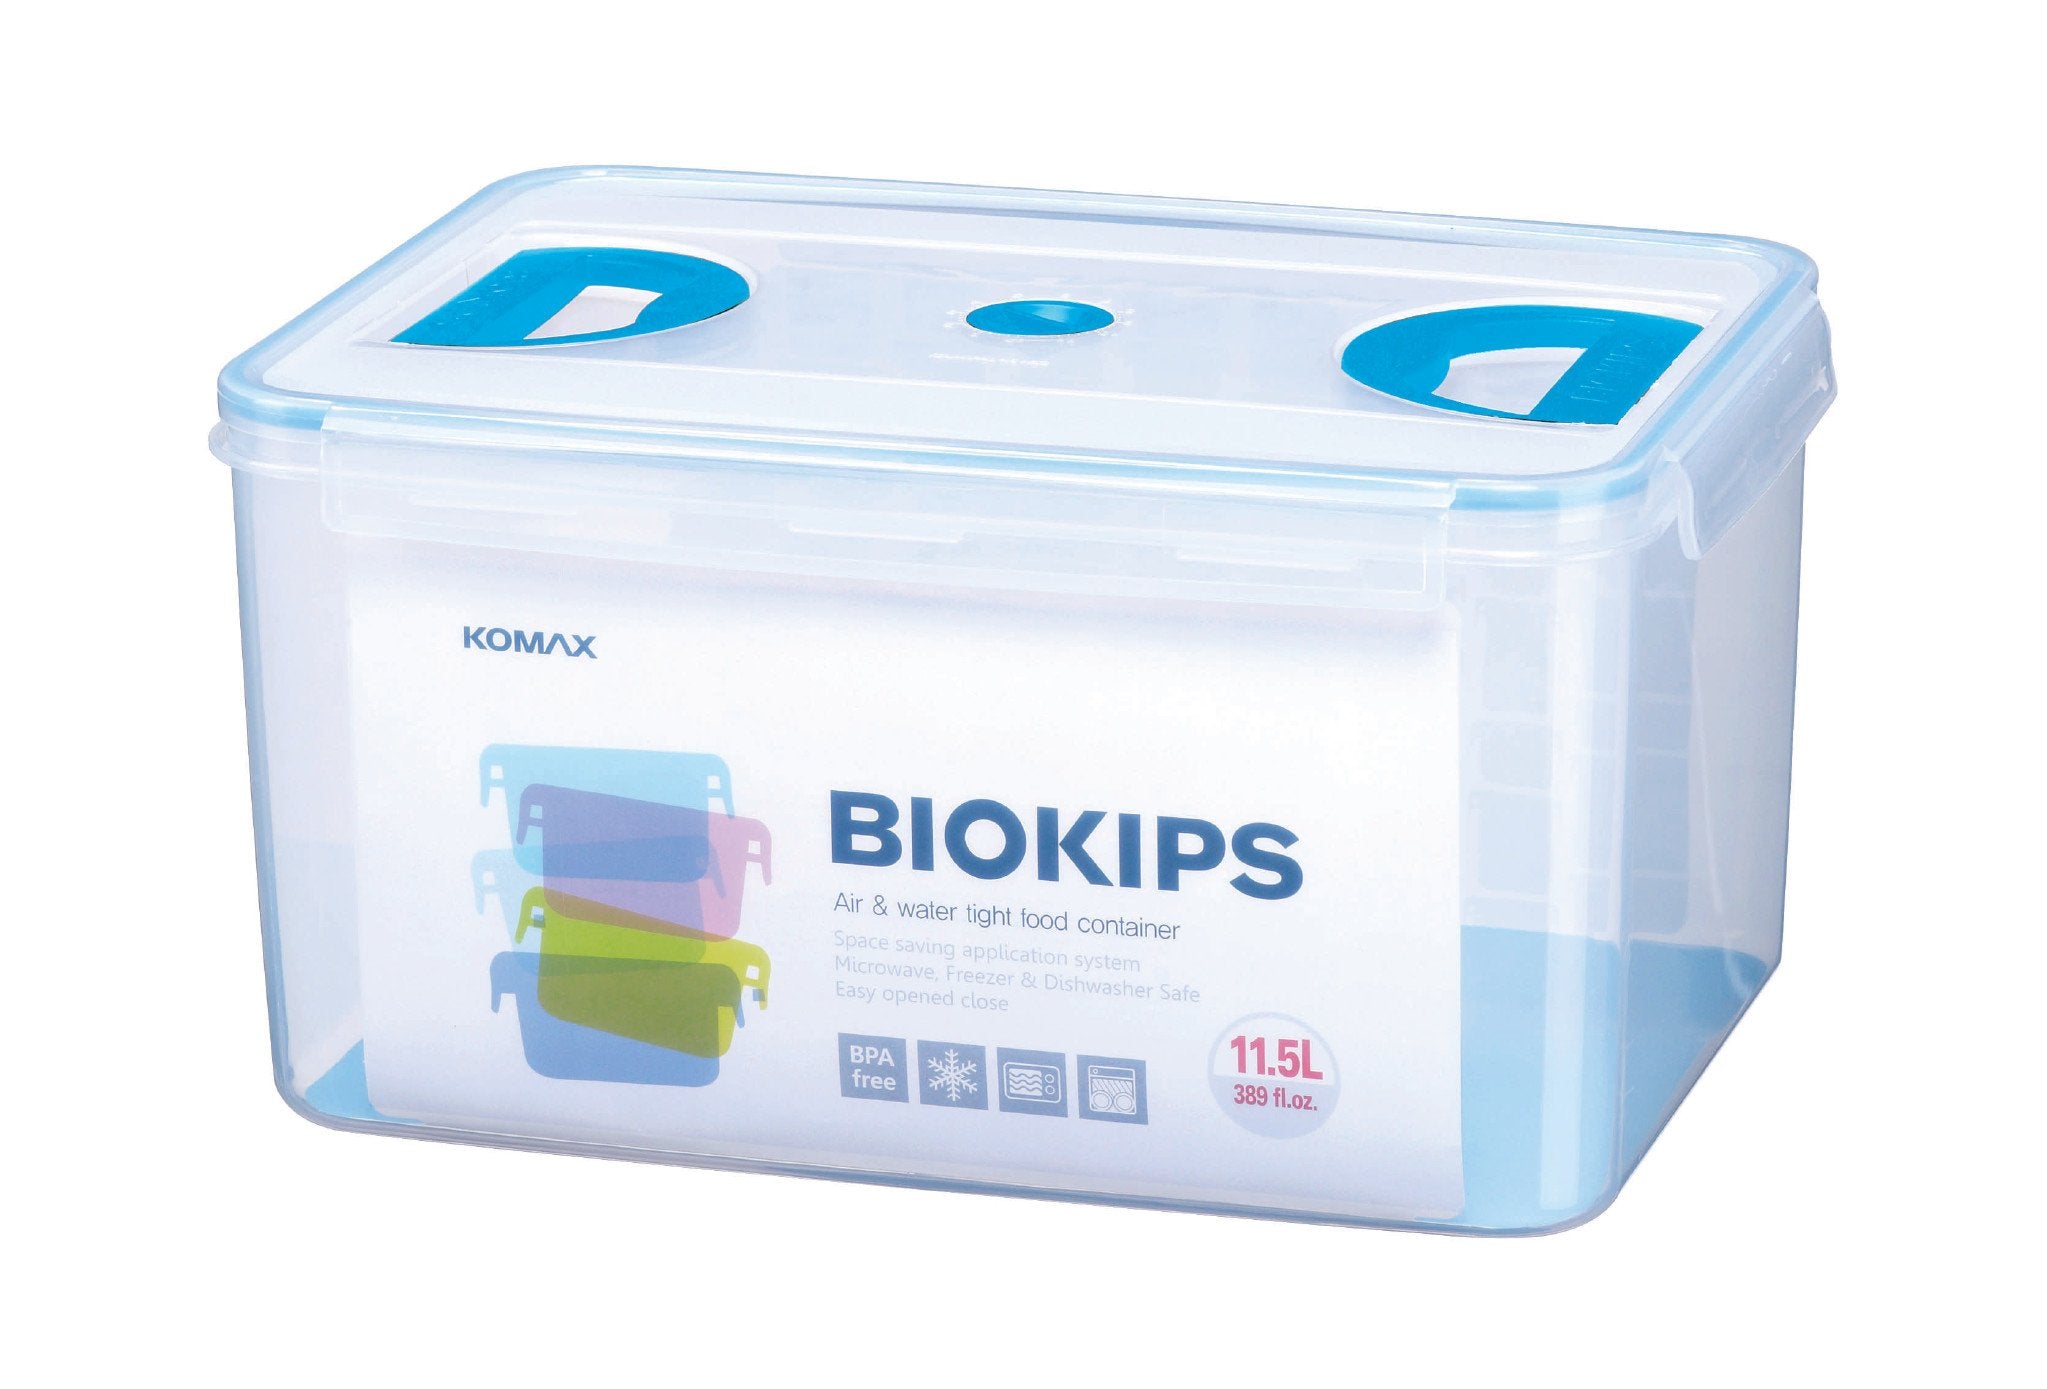 Komax Biokips Rectangular Food Storage Container With Two Handle, 11.5 L